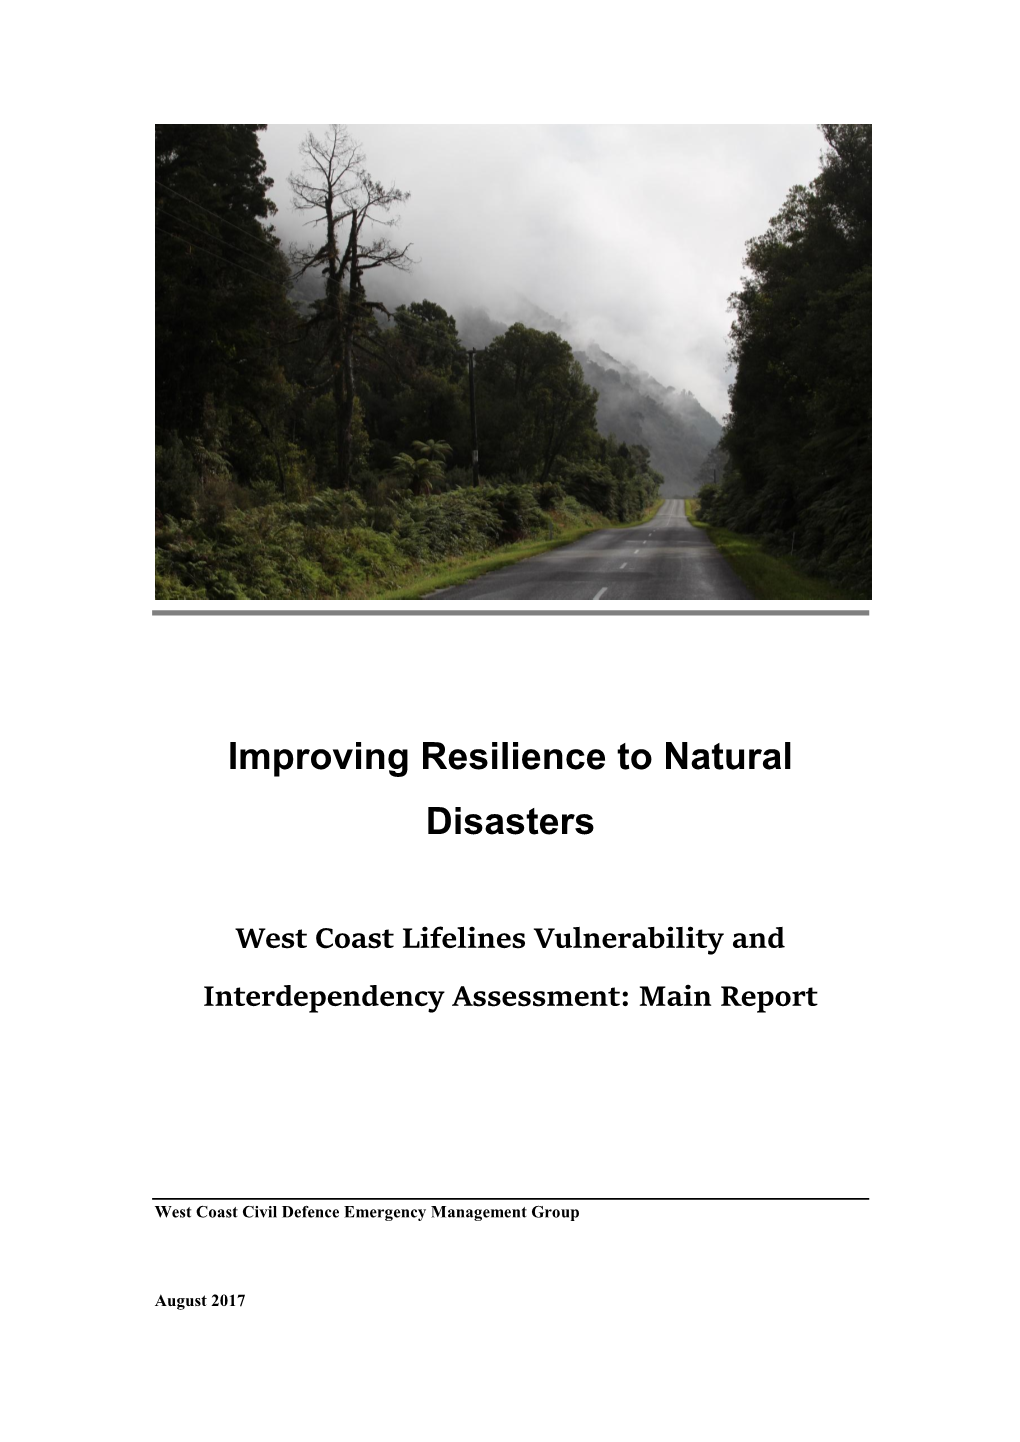 Improving Resilience to Natural Disasters – Main Report